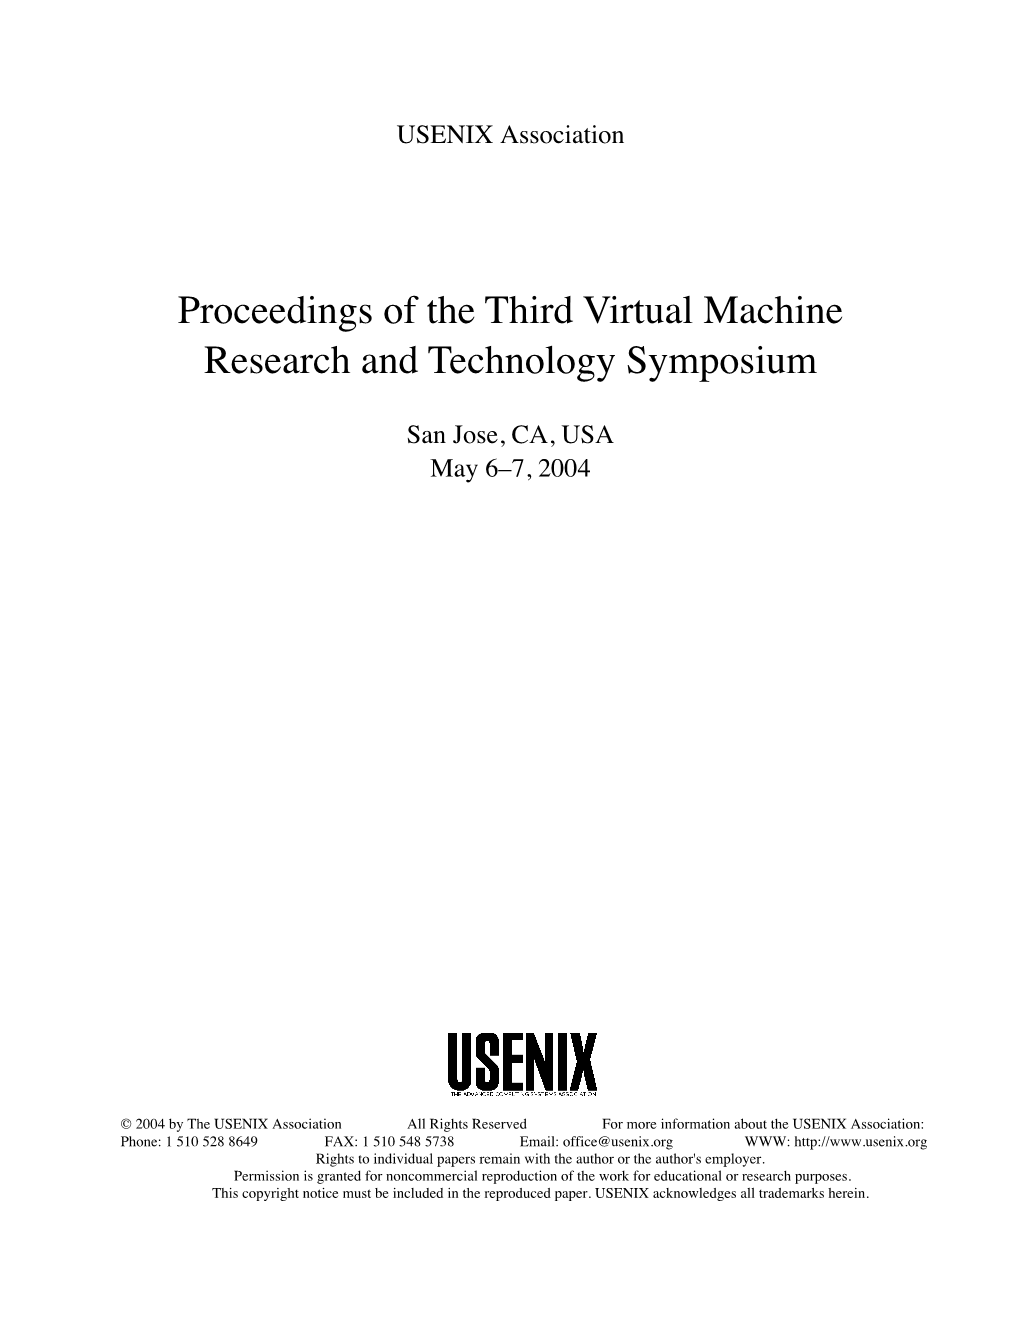 Proceedings of the Third Virtual Machine Research and Technology Symposium